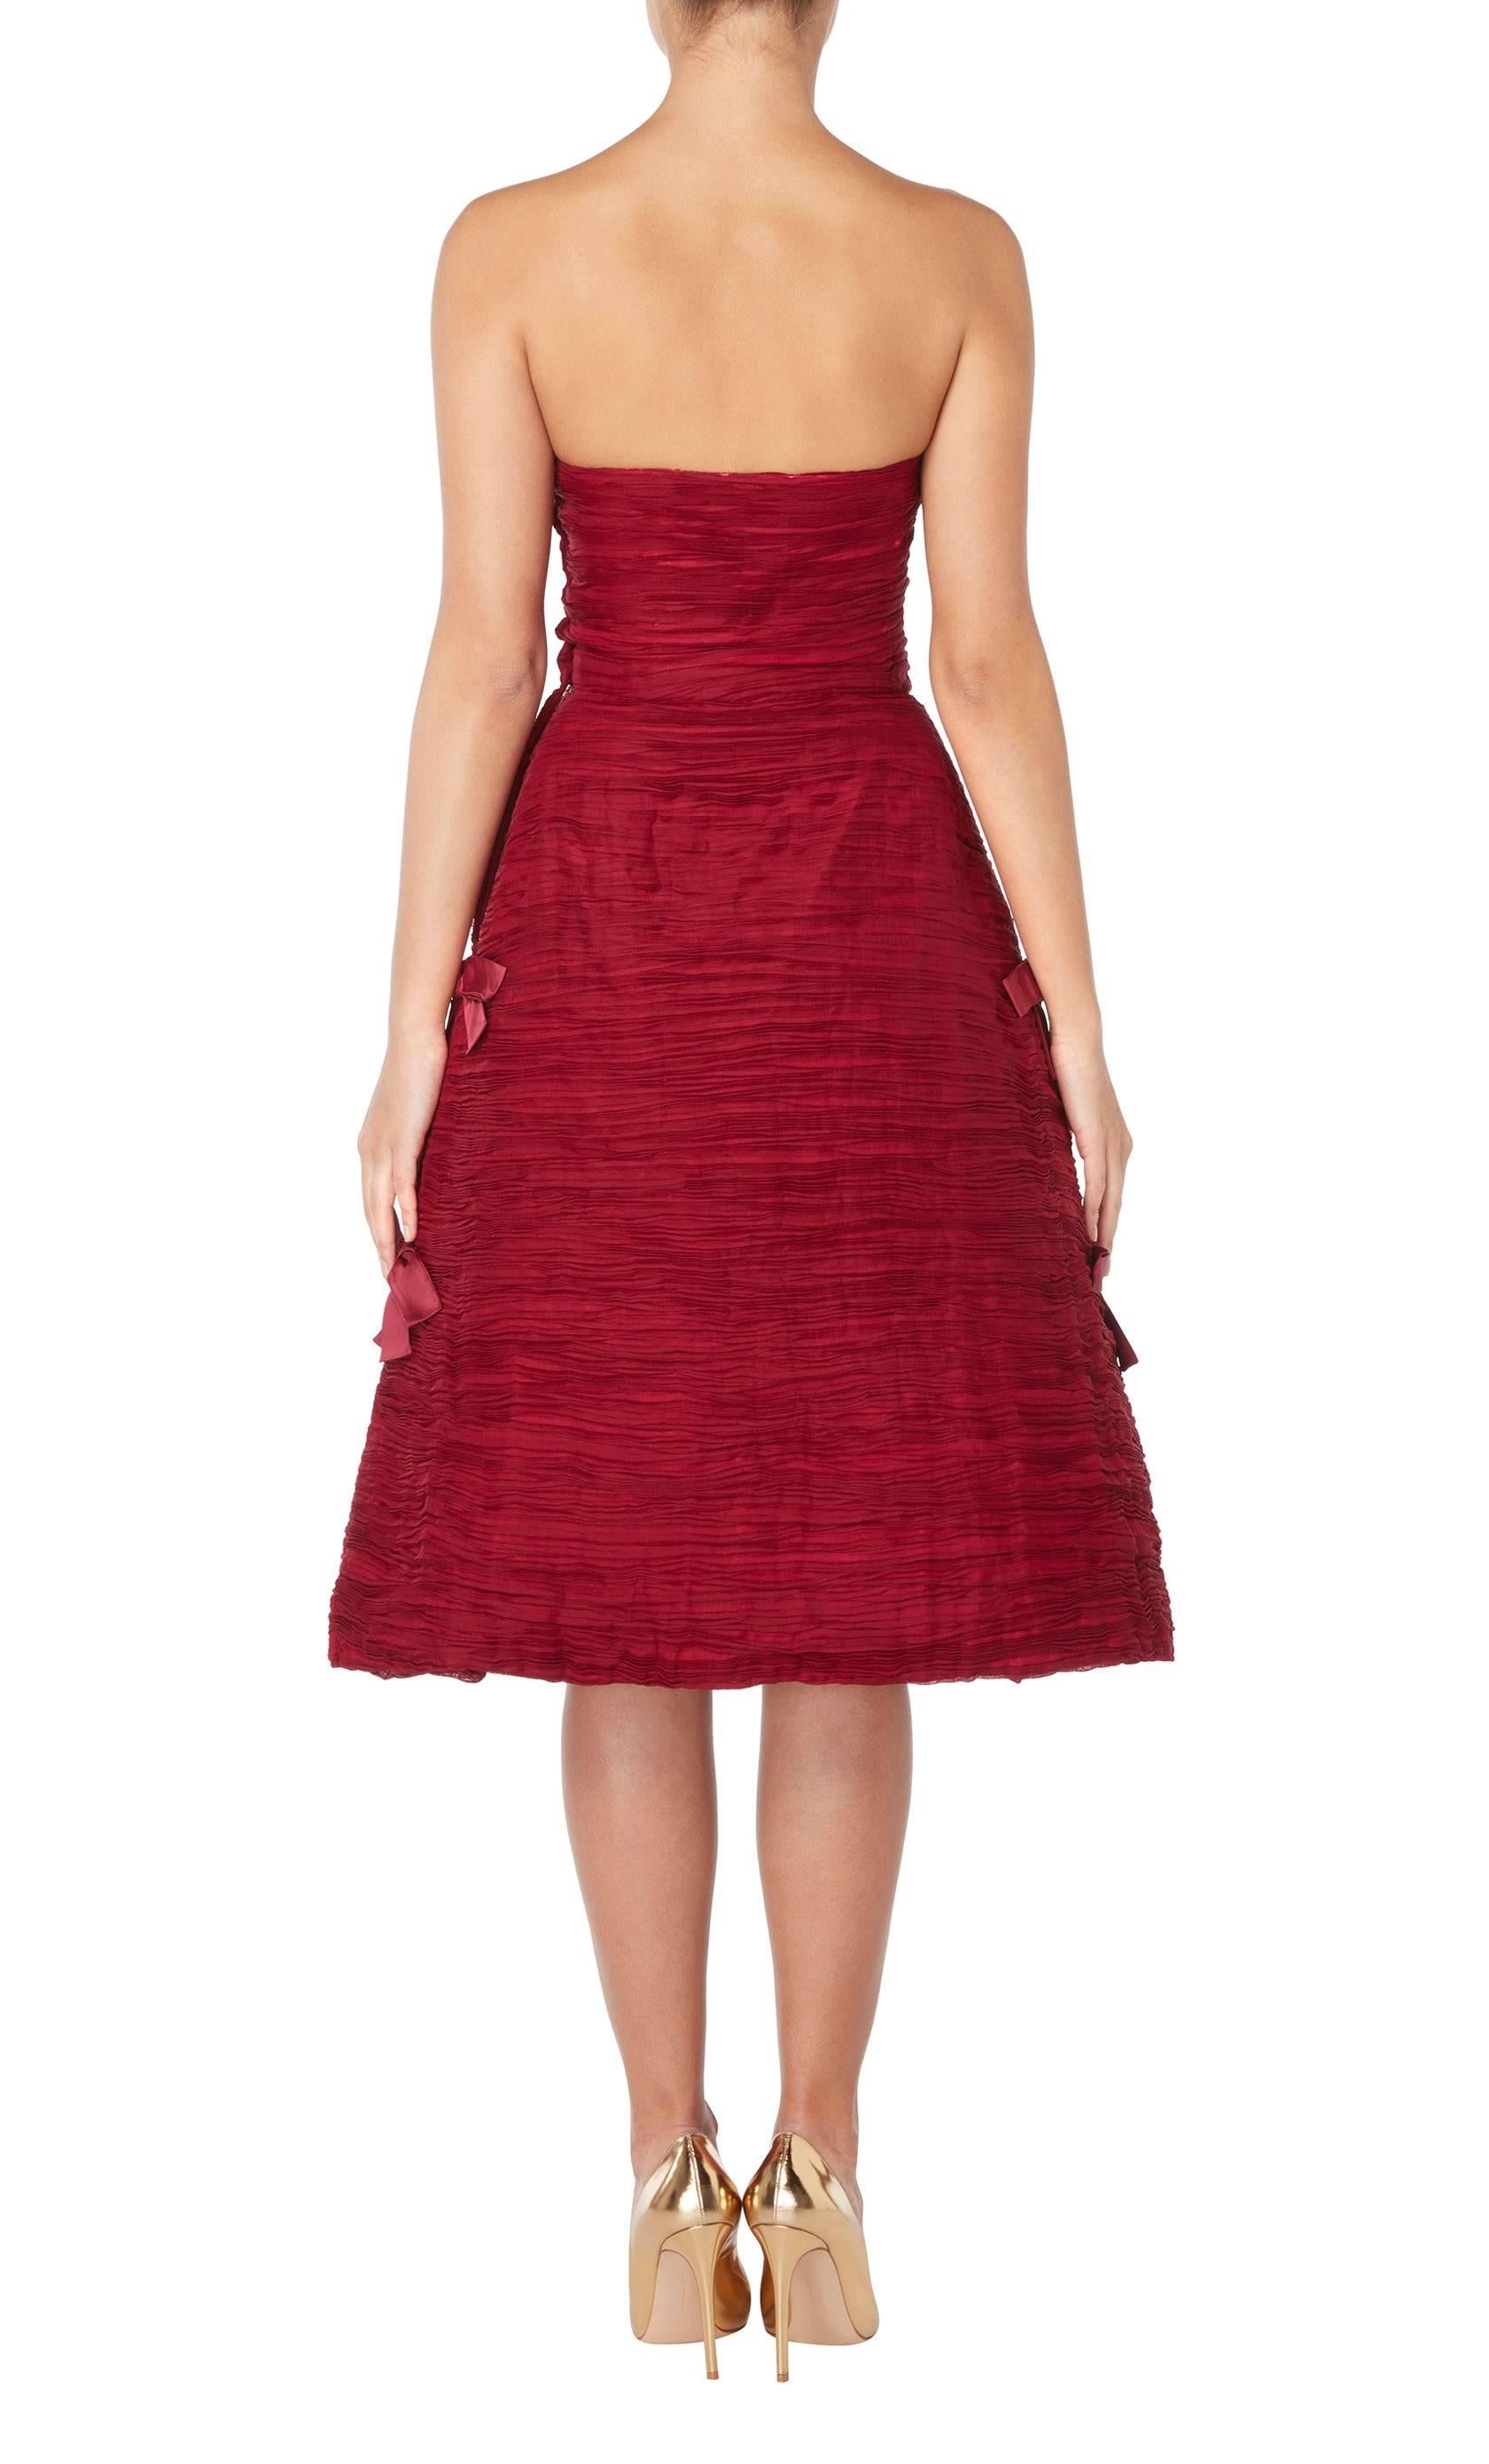 Red Sybil Connolly burgundy dress, circa 1956 For Sale